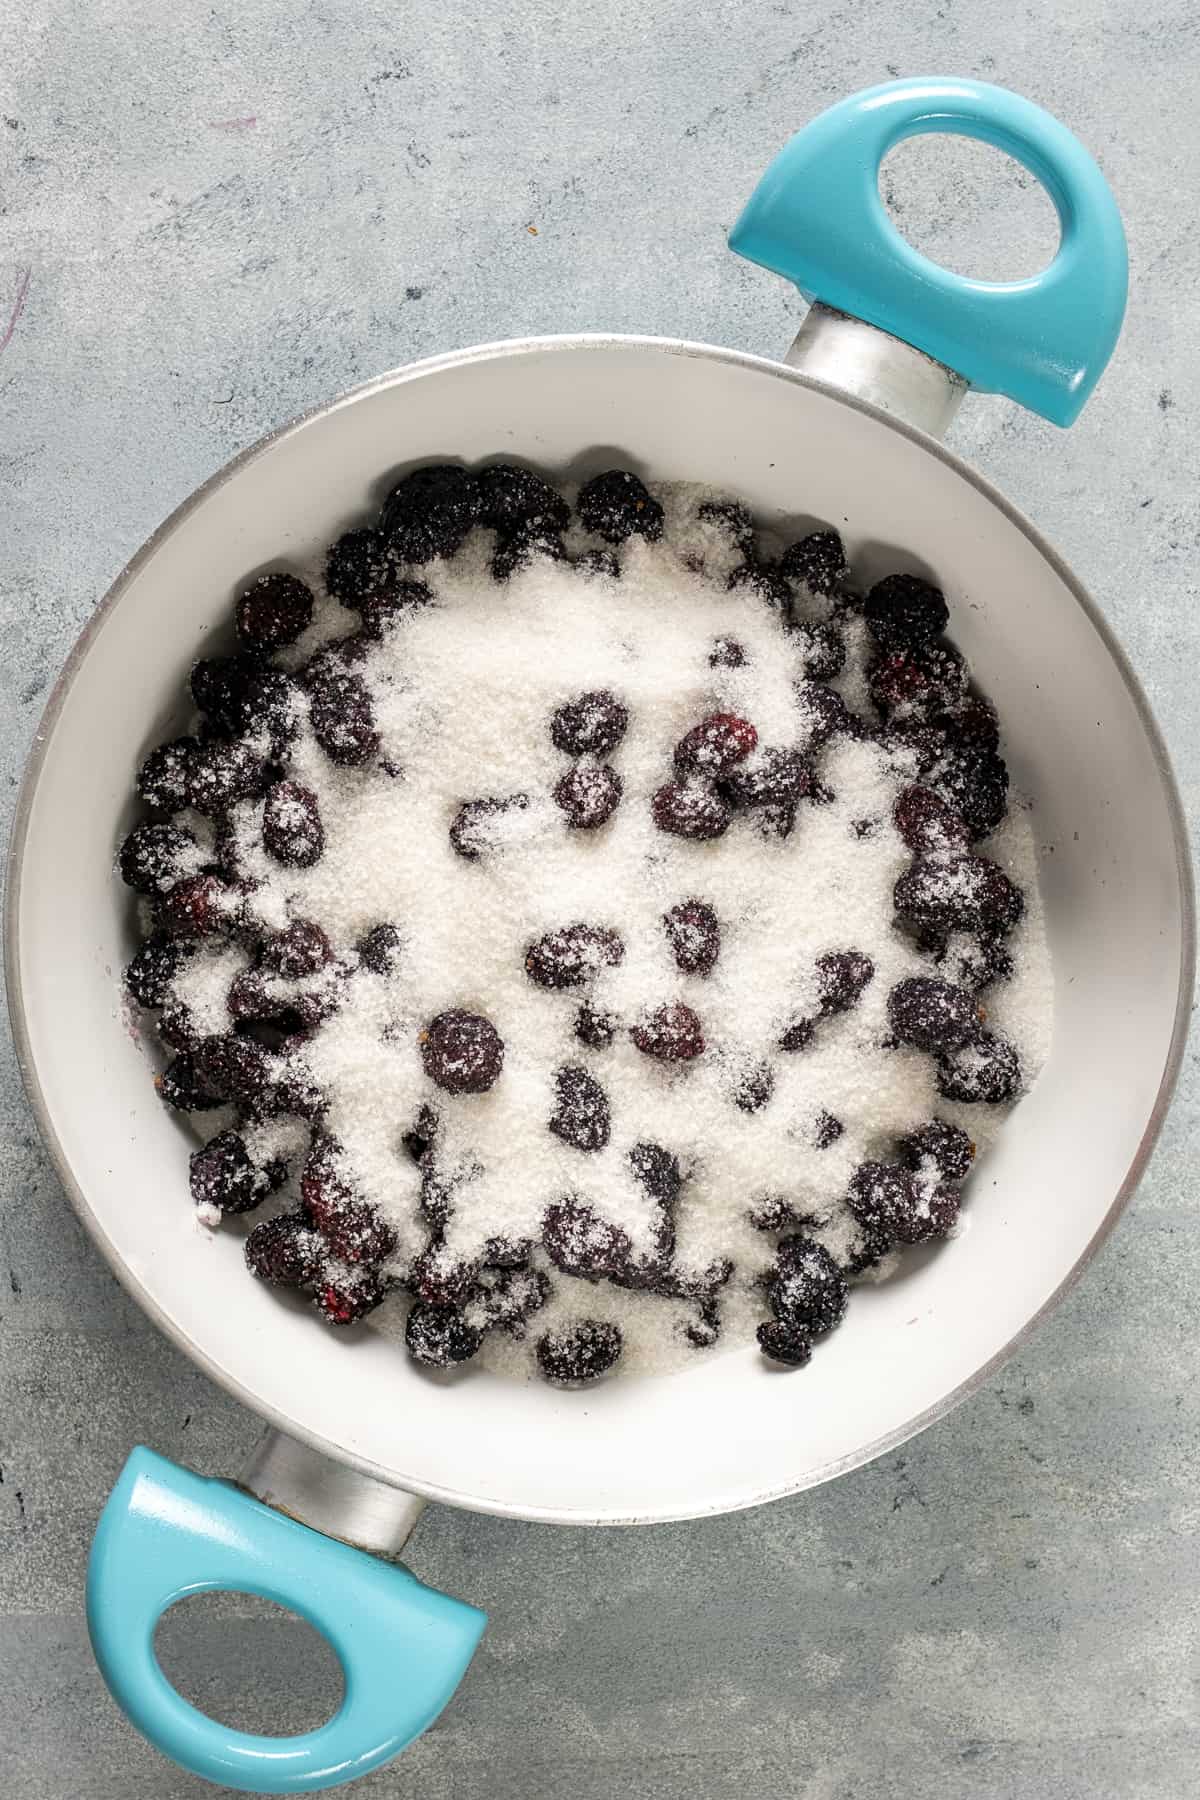 Mulberries coated with granulated sugar in a white pan.